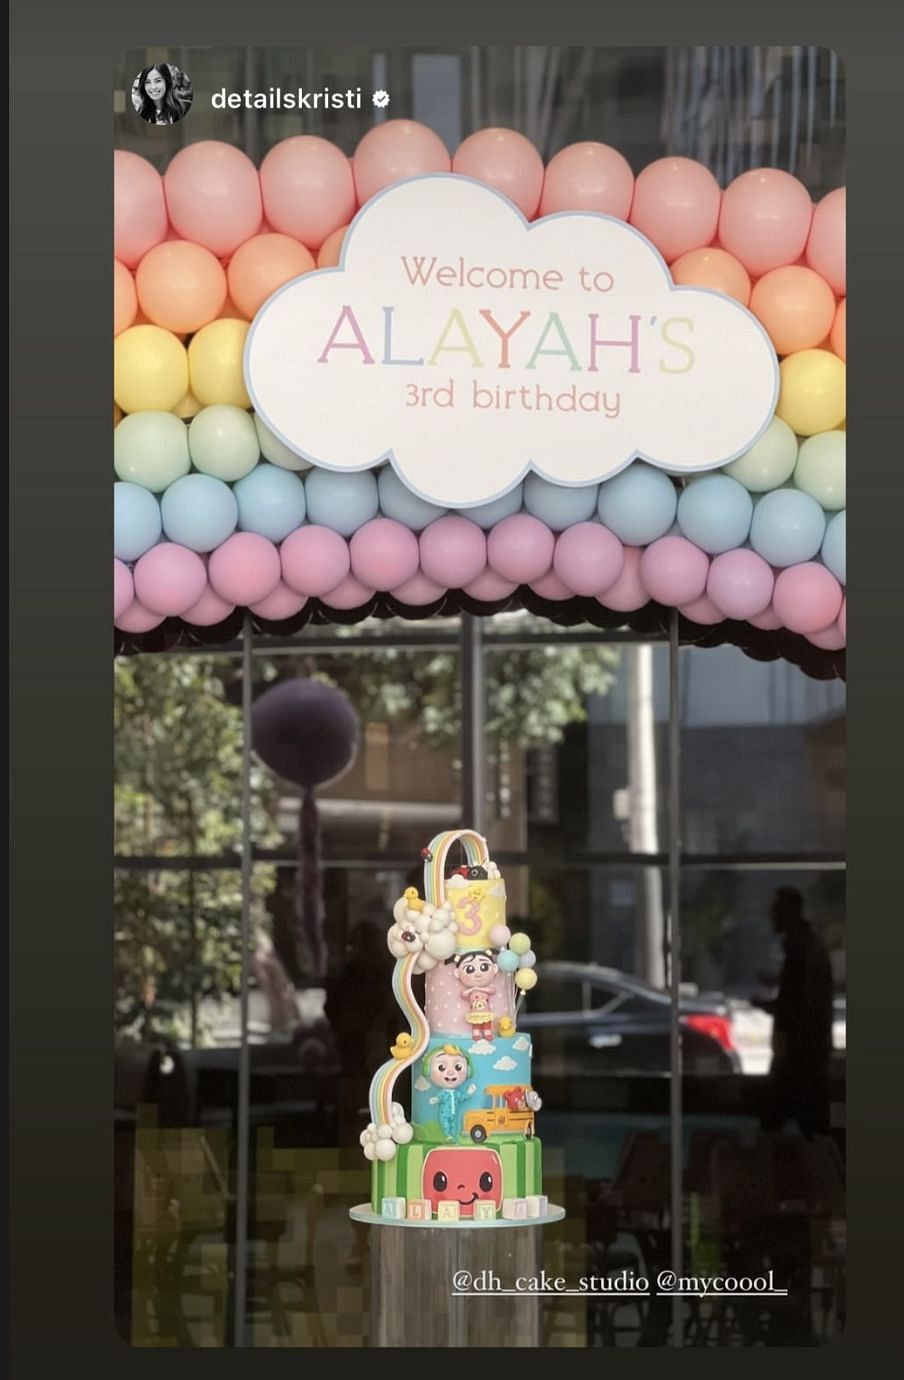 The birthday cake for little Alayah